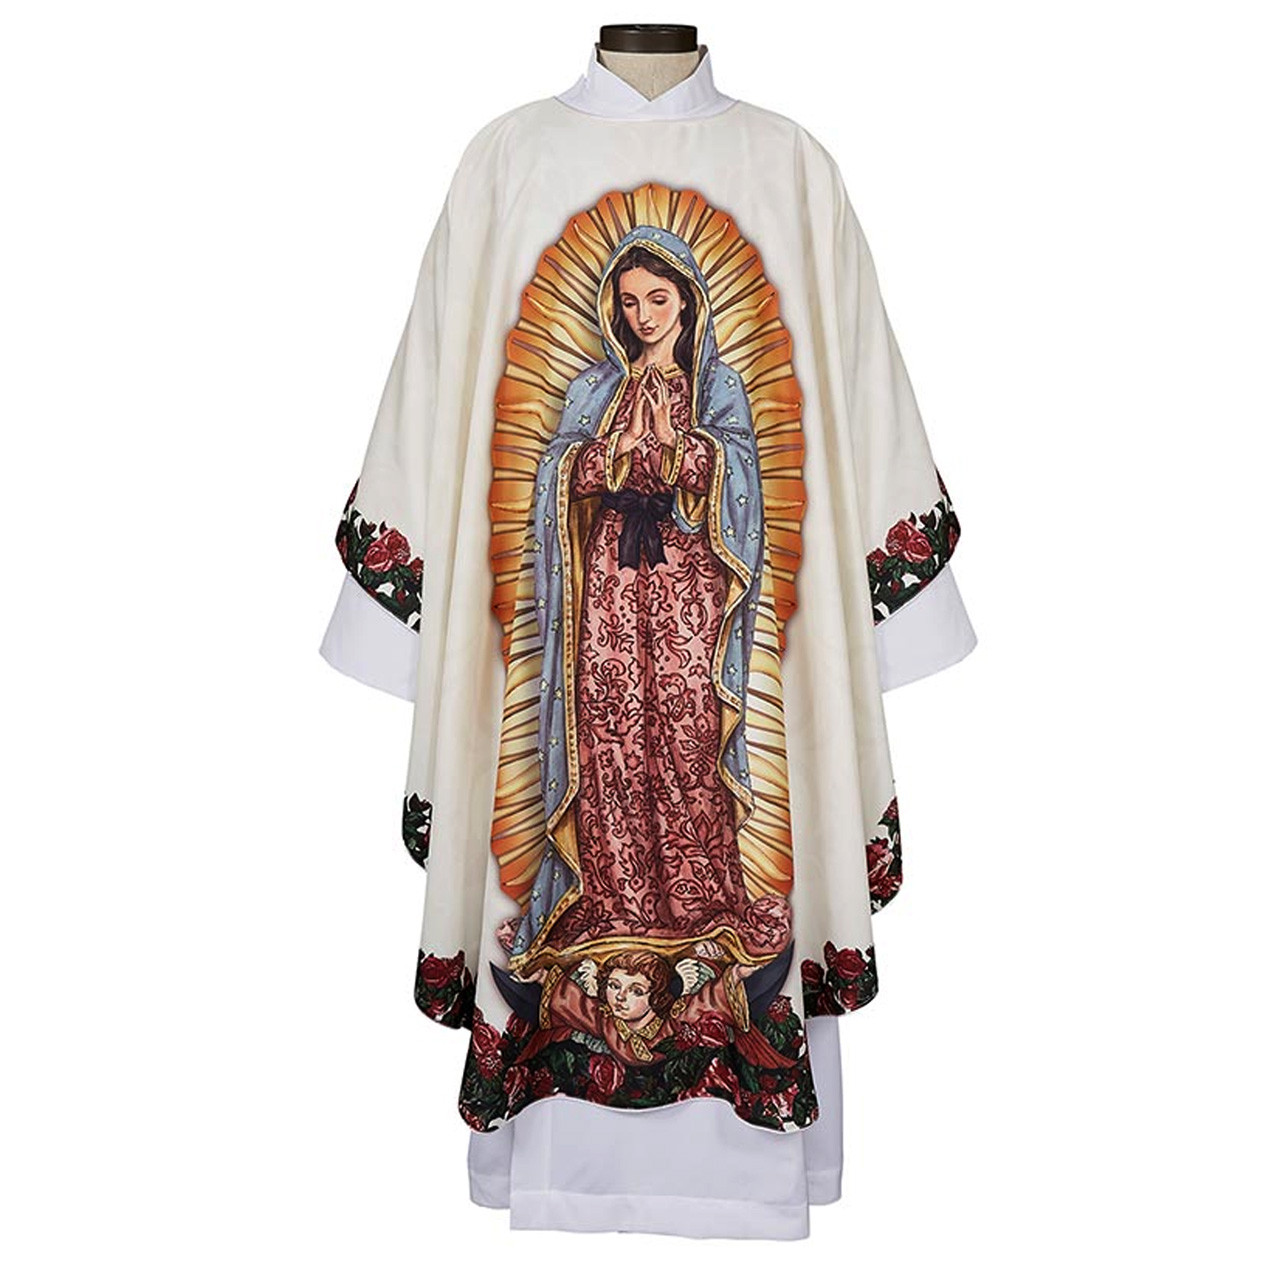 G4046 Our Lady of Guadalupe Chasuble